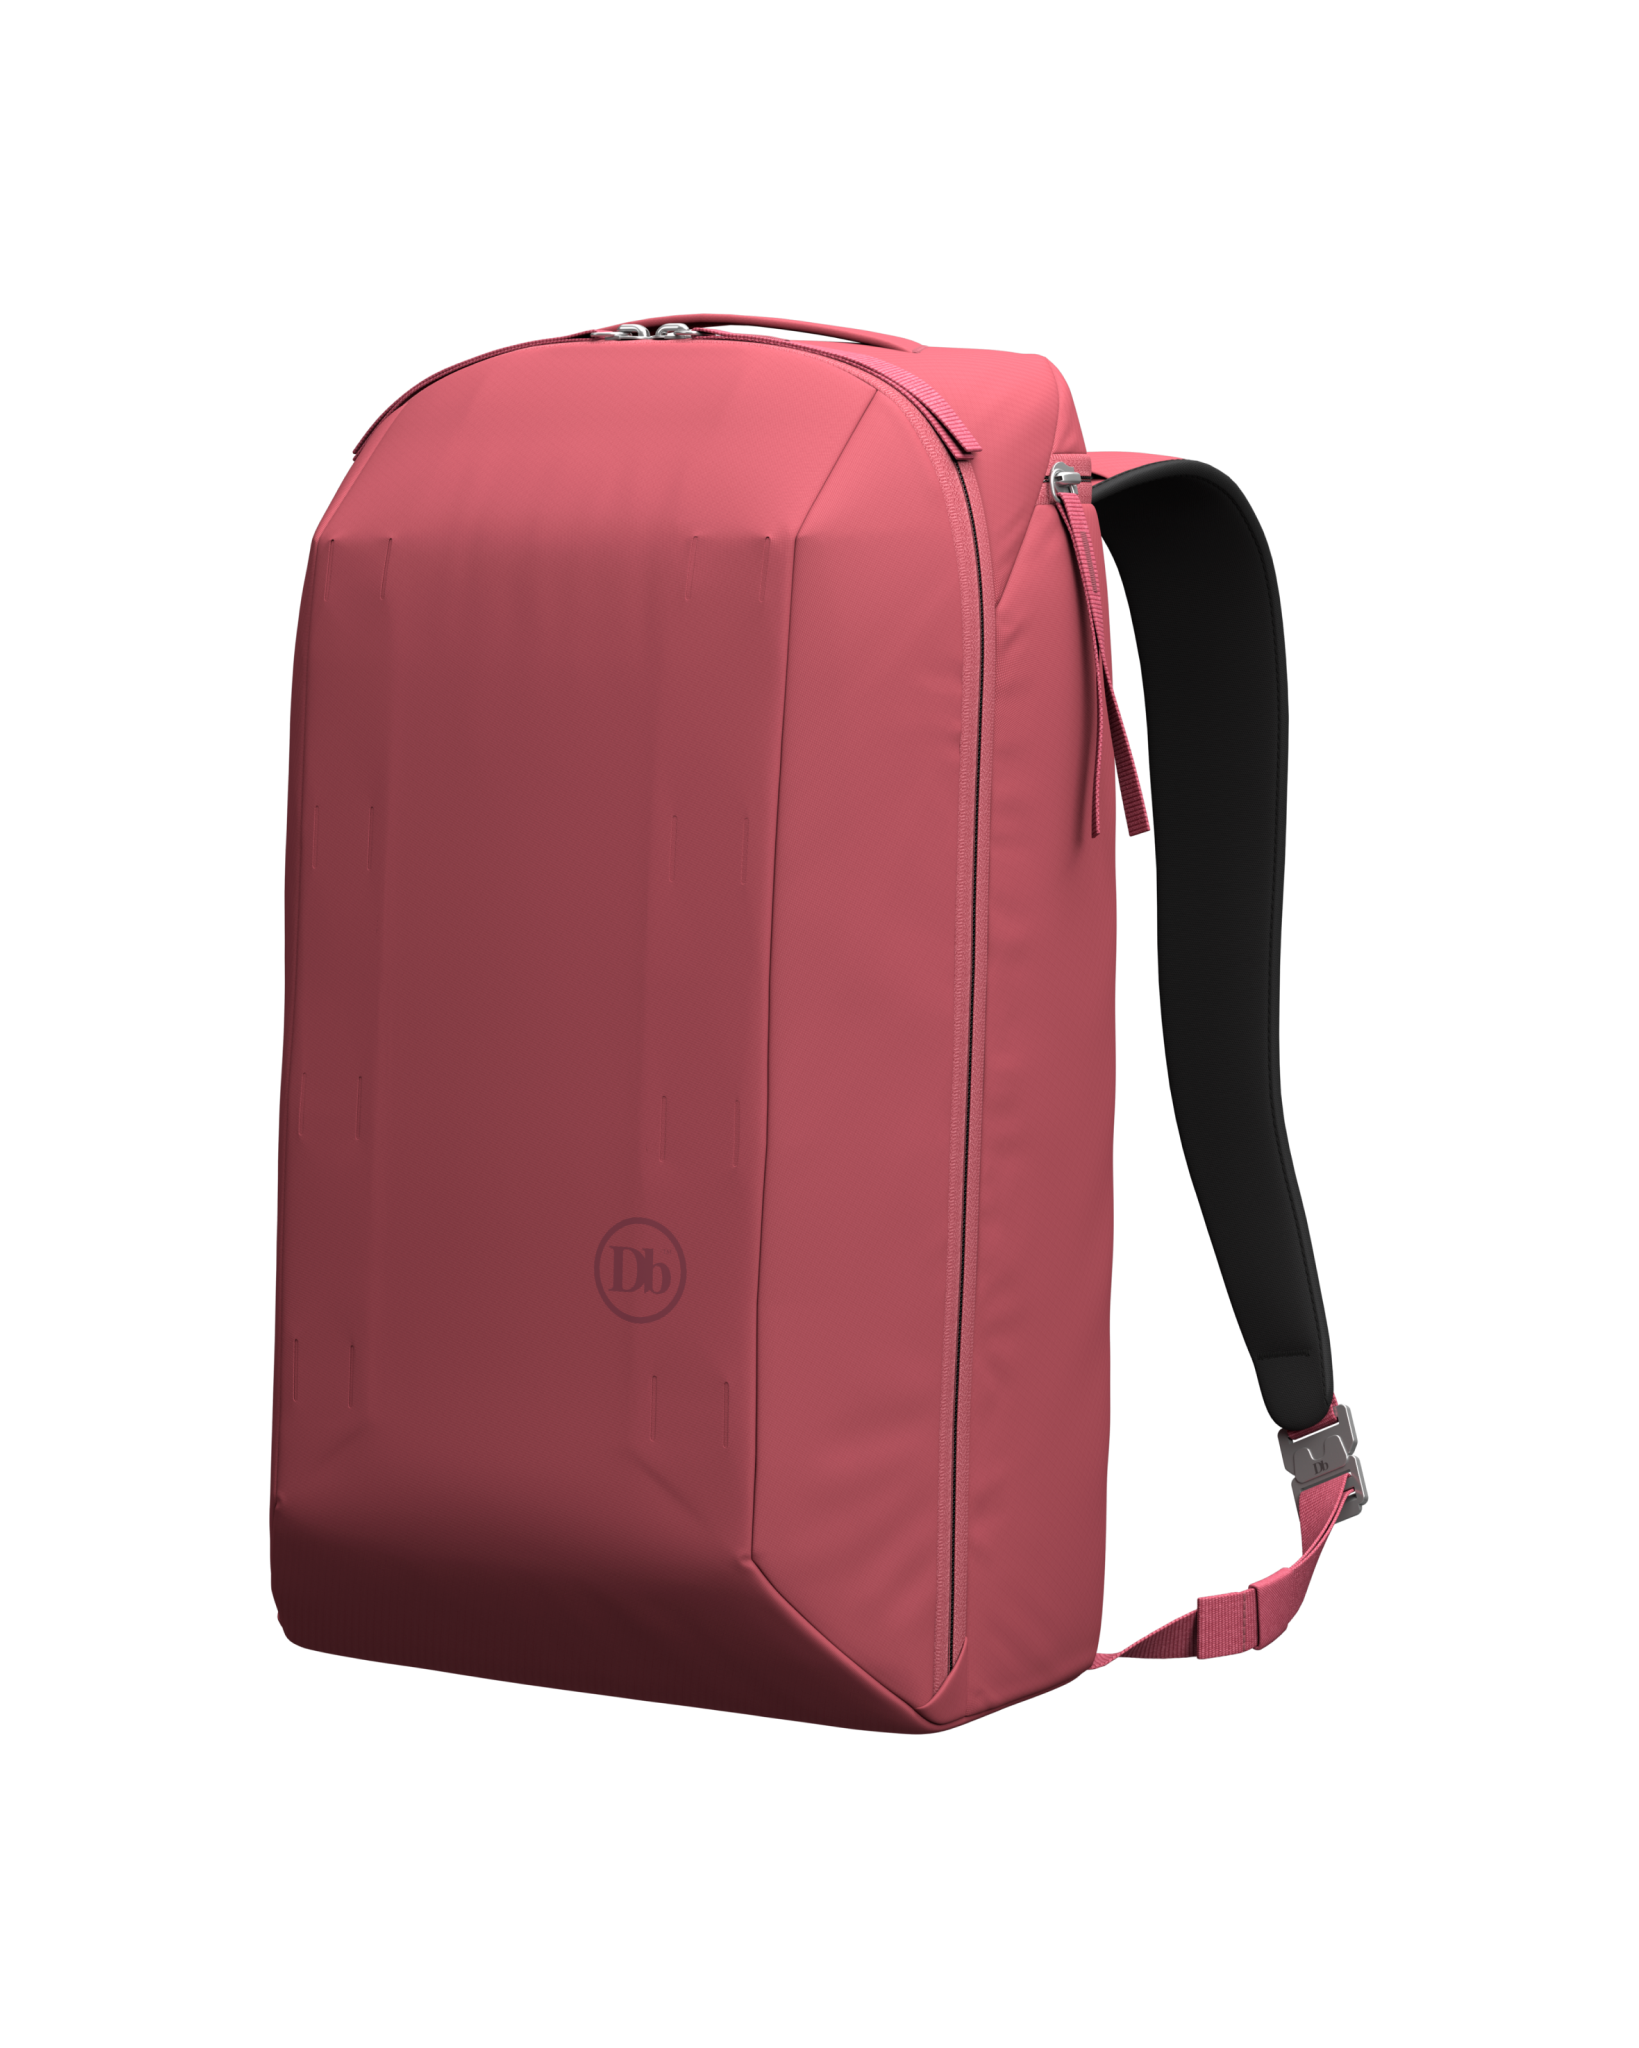 Freya 1St Generation Backpack 16L Sunbleached Red - Sunbleached Red